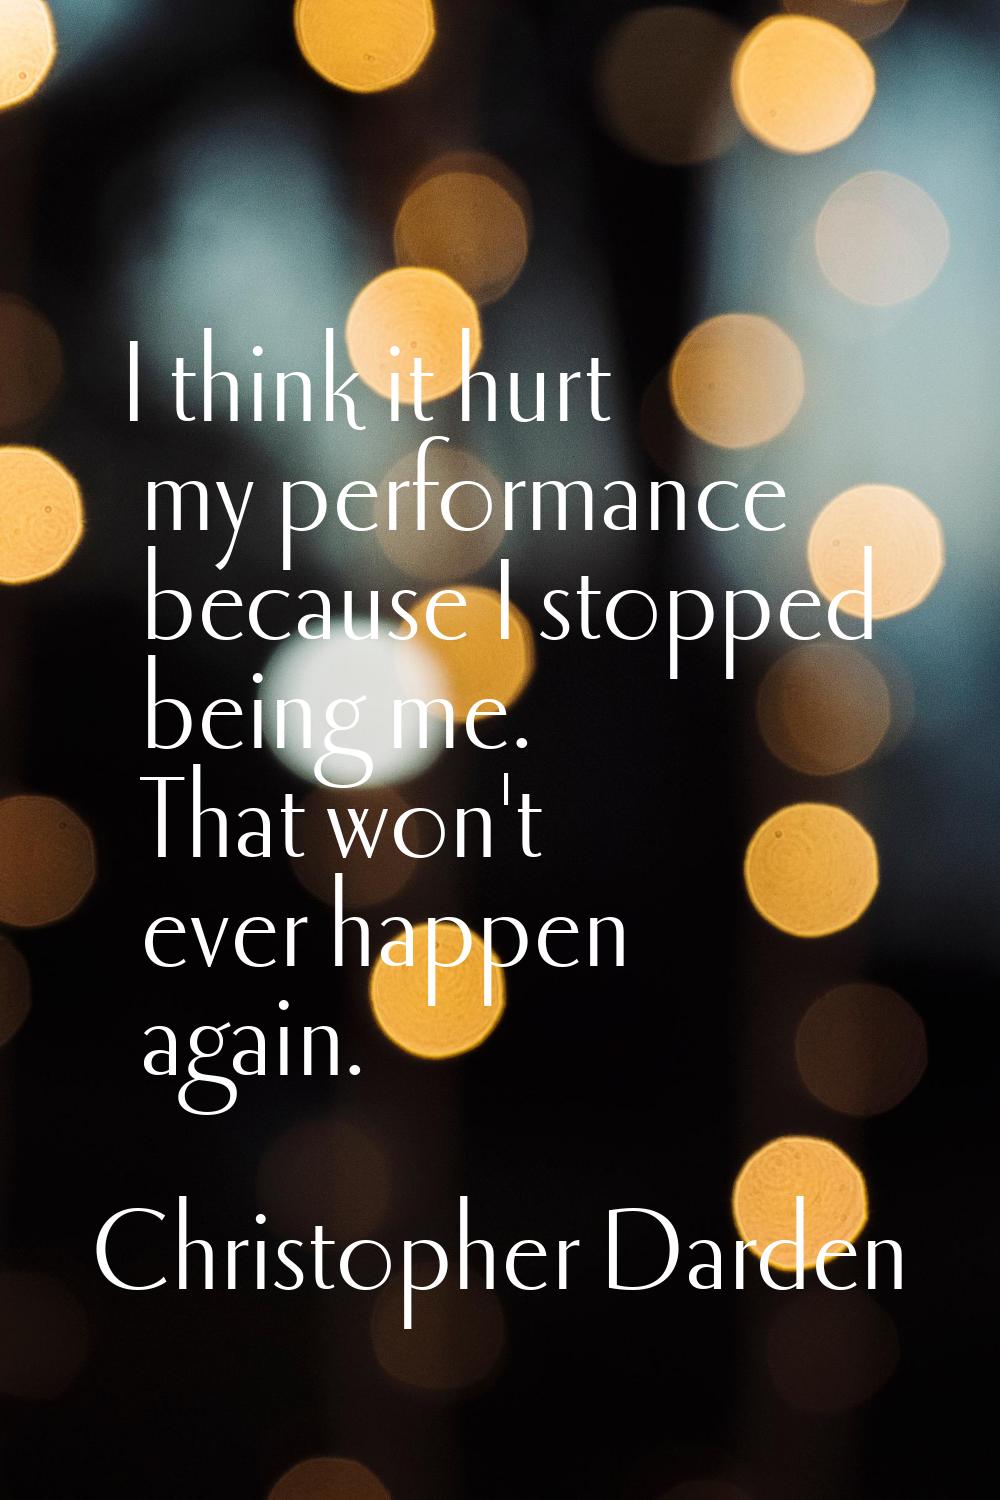 I think it hurt my performance because I stopped being me. That won't ever happen again.